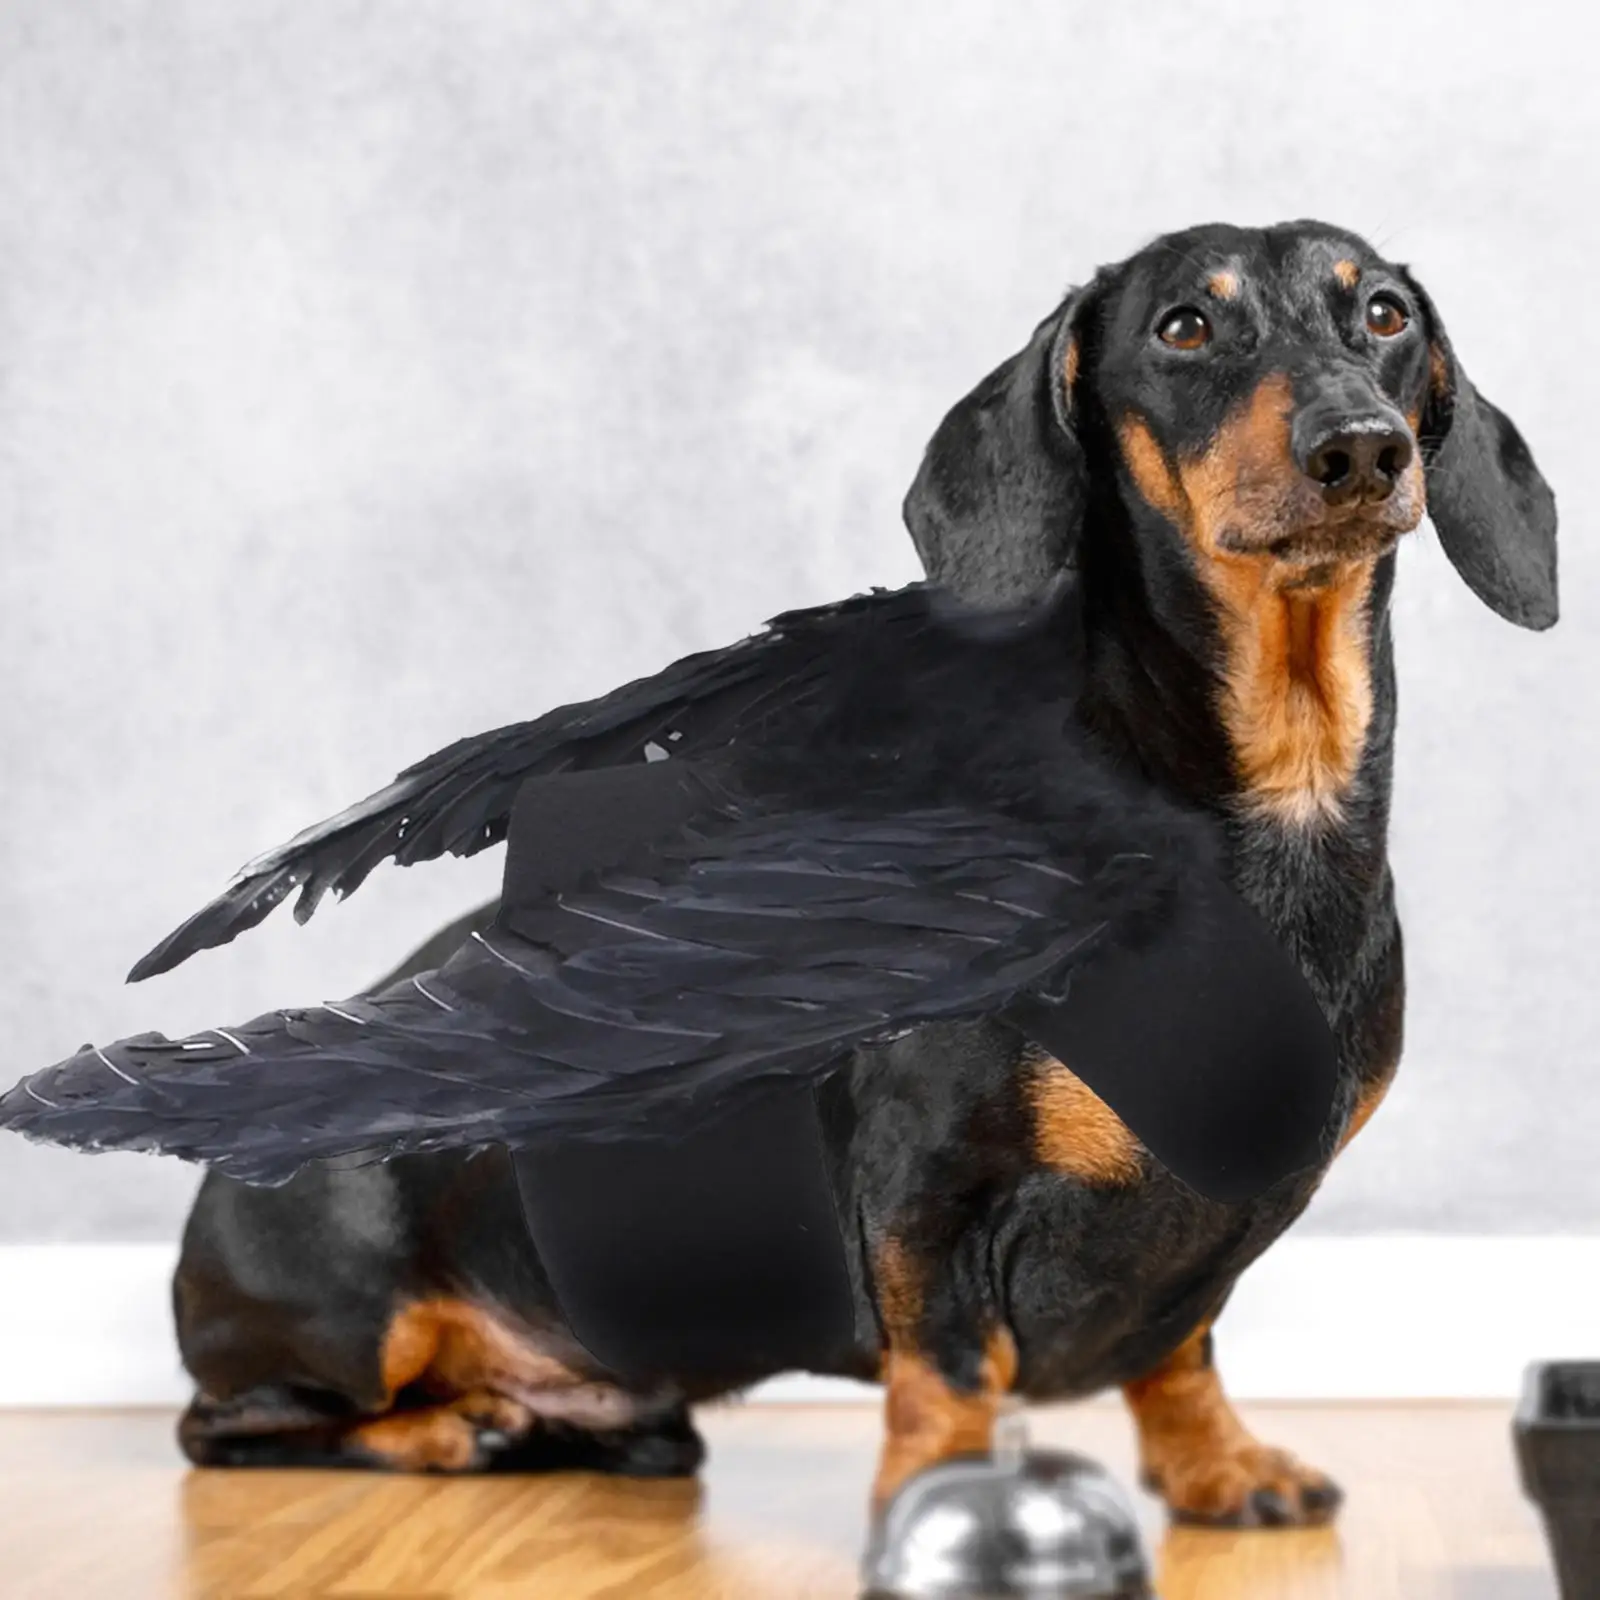 Halloween Angel Wing Costume Pet Cosplay Apparel Dog Clothes for Fancy Dress Party